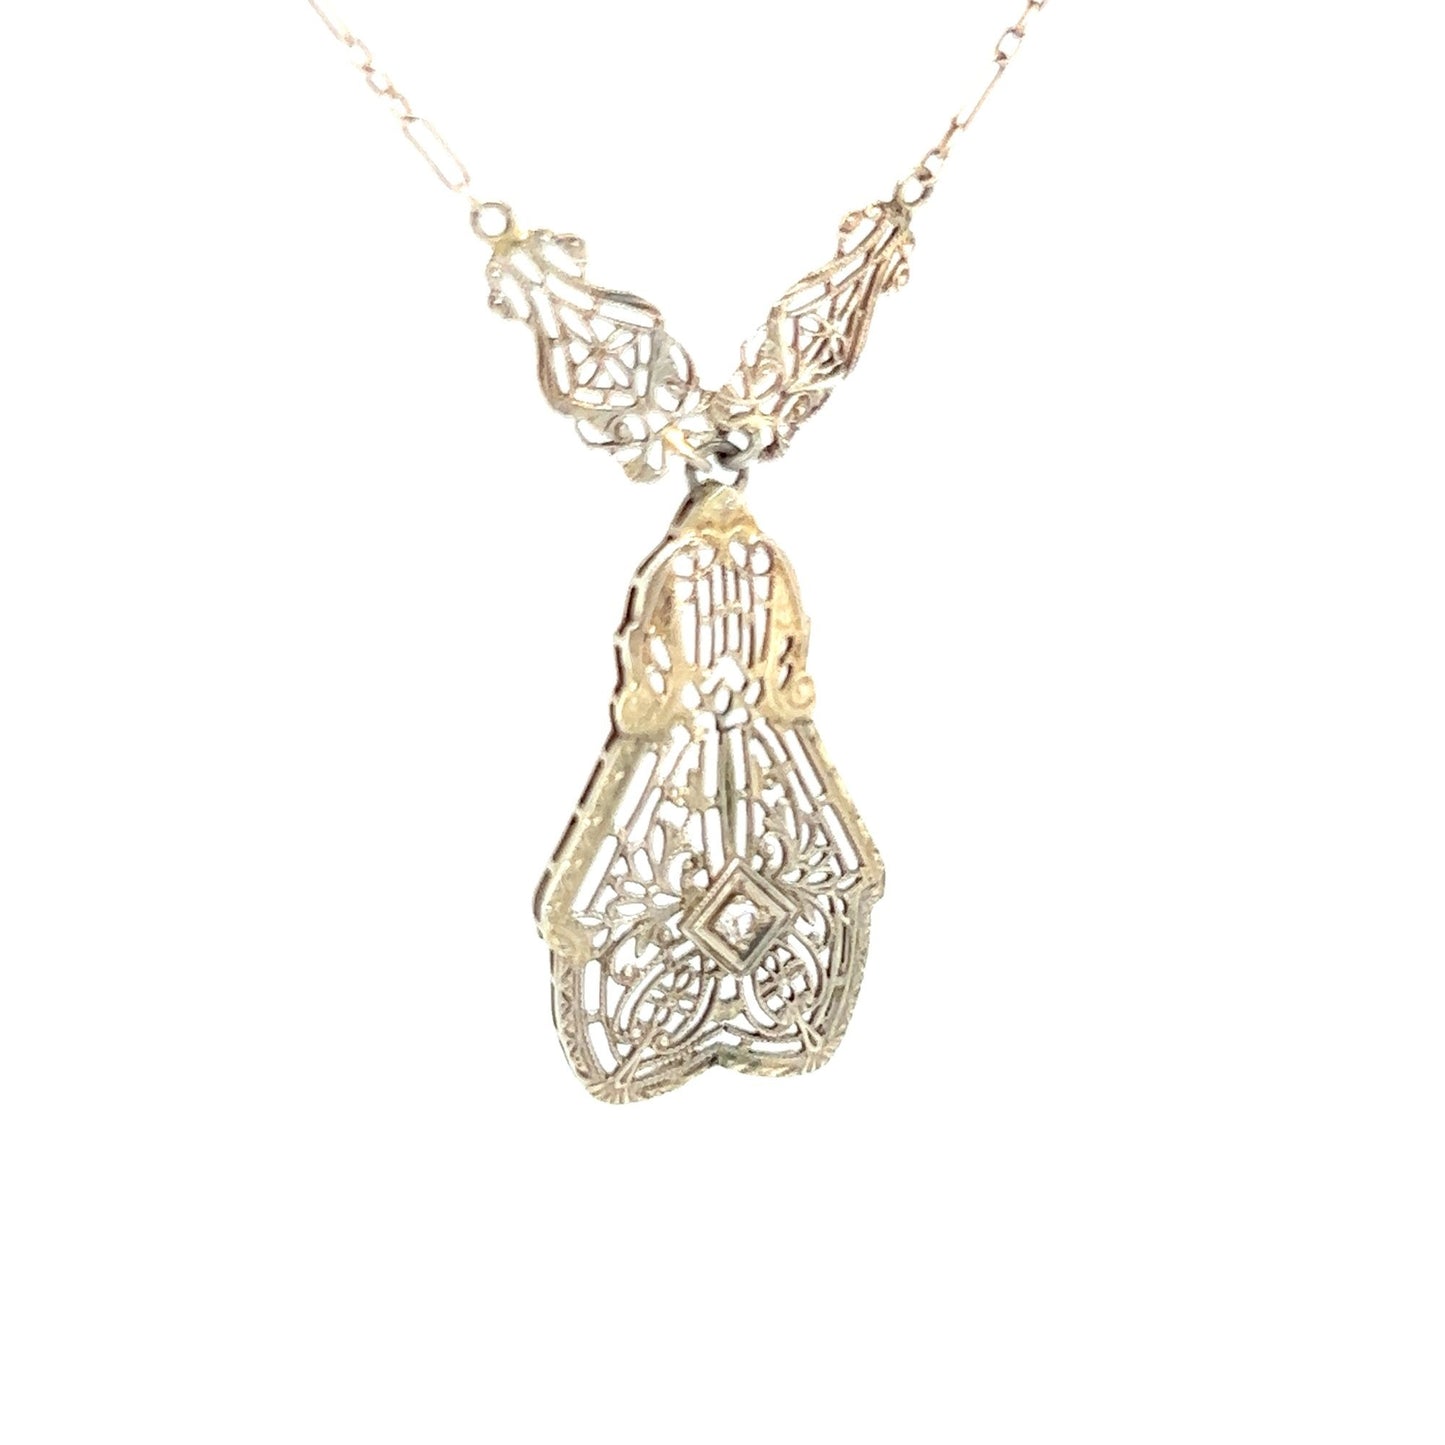 Vintage 10kt Gold Filigree Pendant with a Solitaire Rose Cut Diamond & 15 inch Old Style Chain